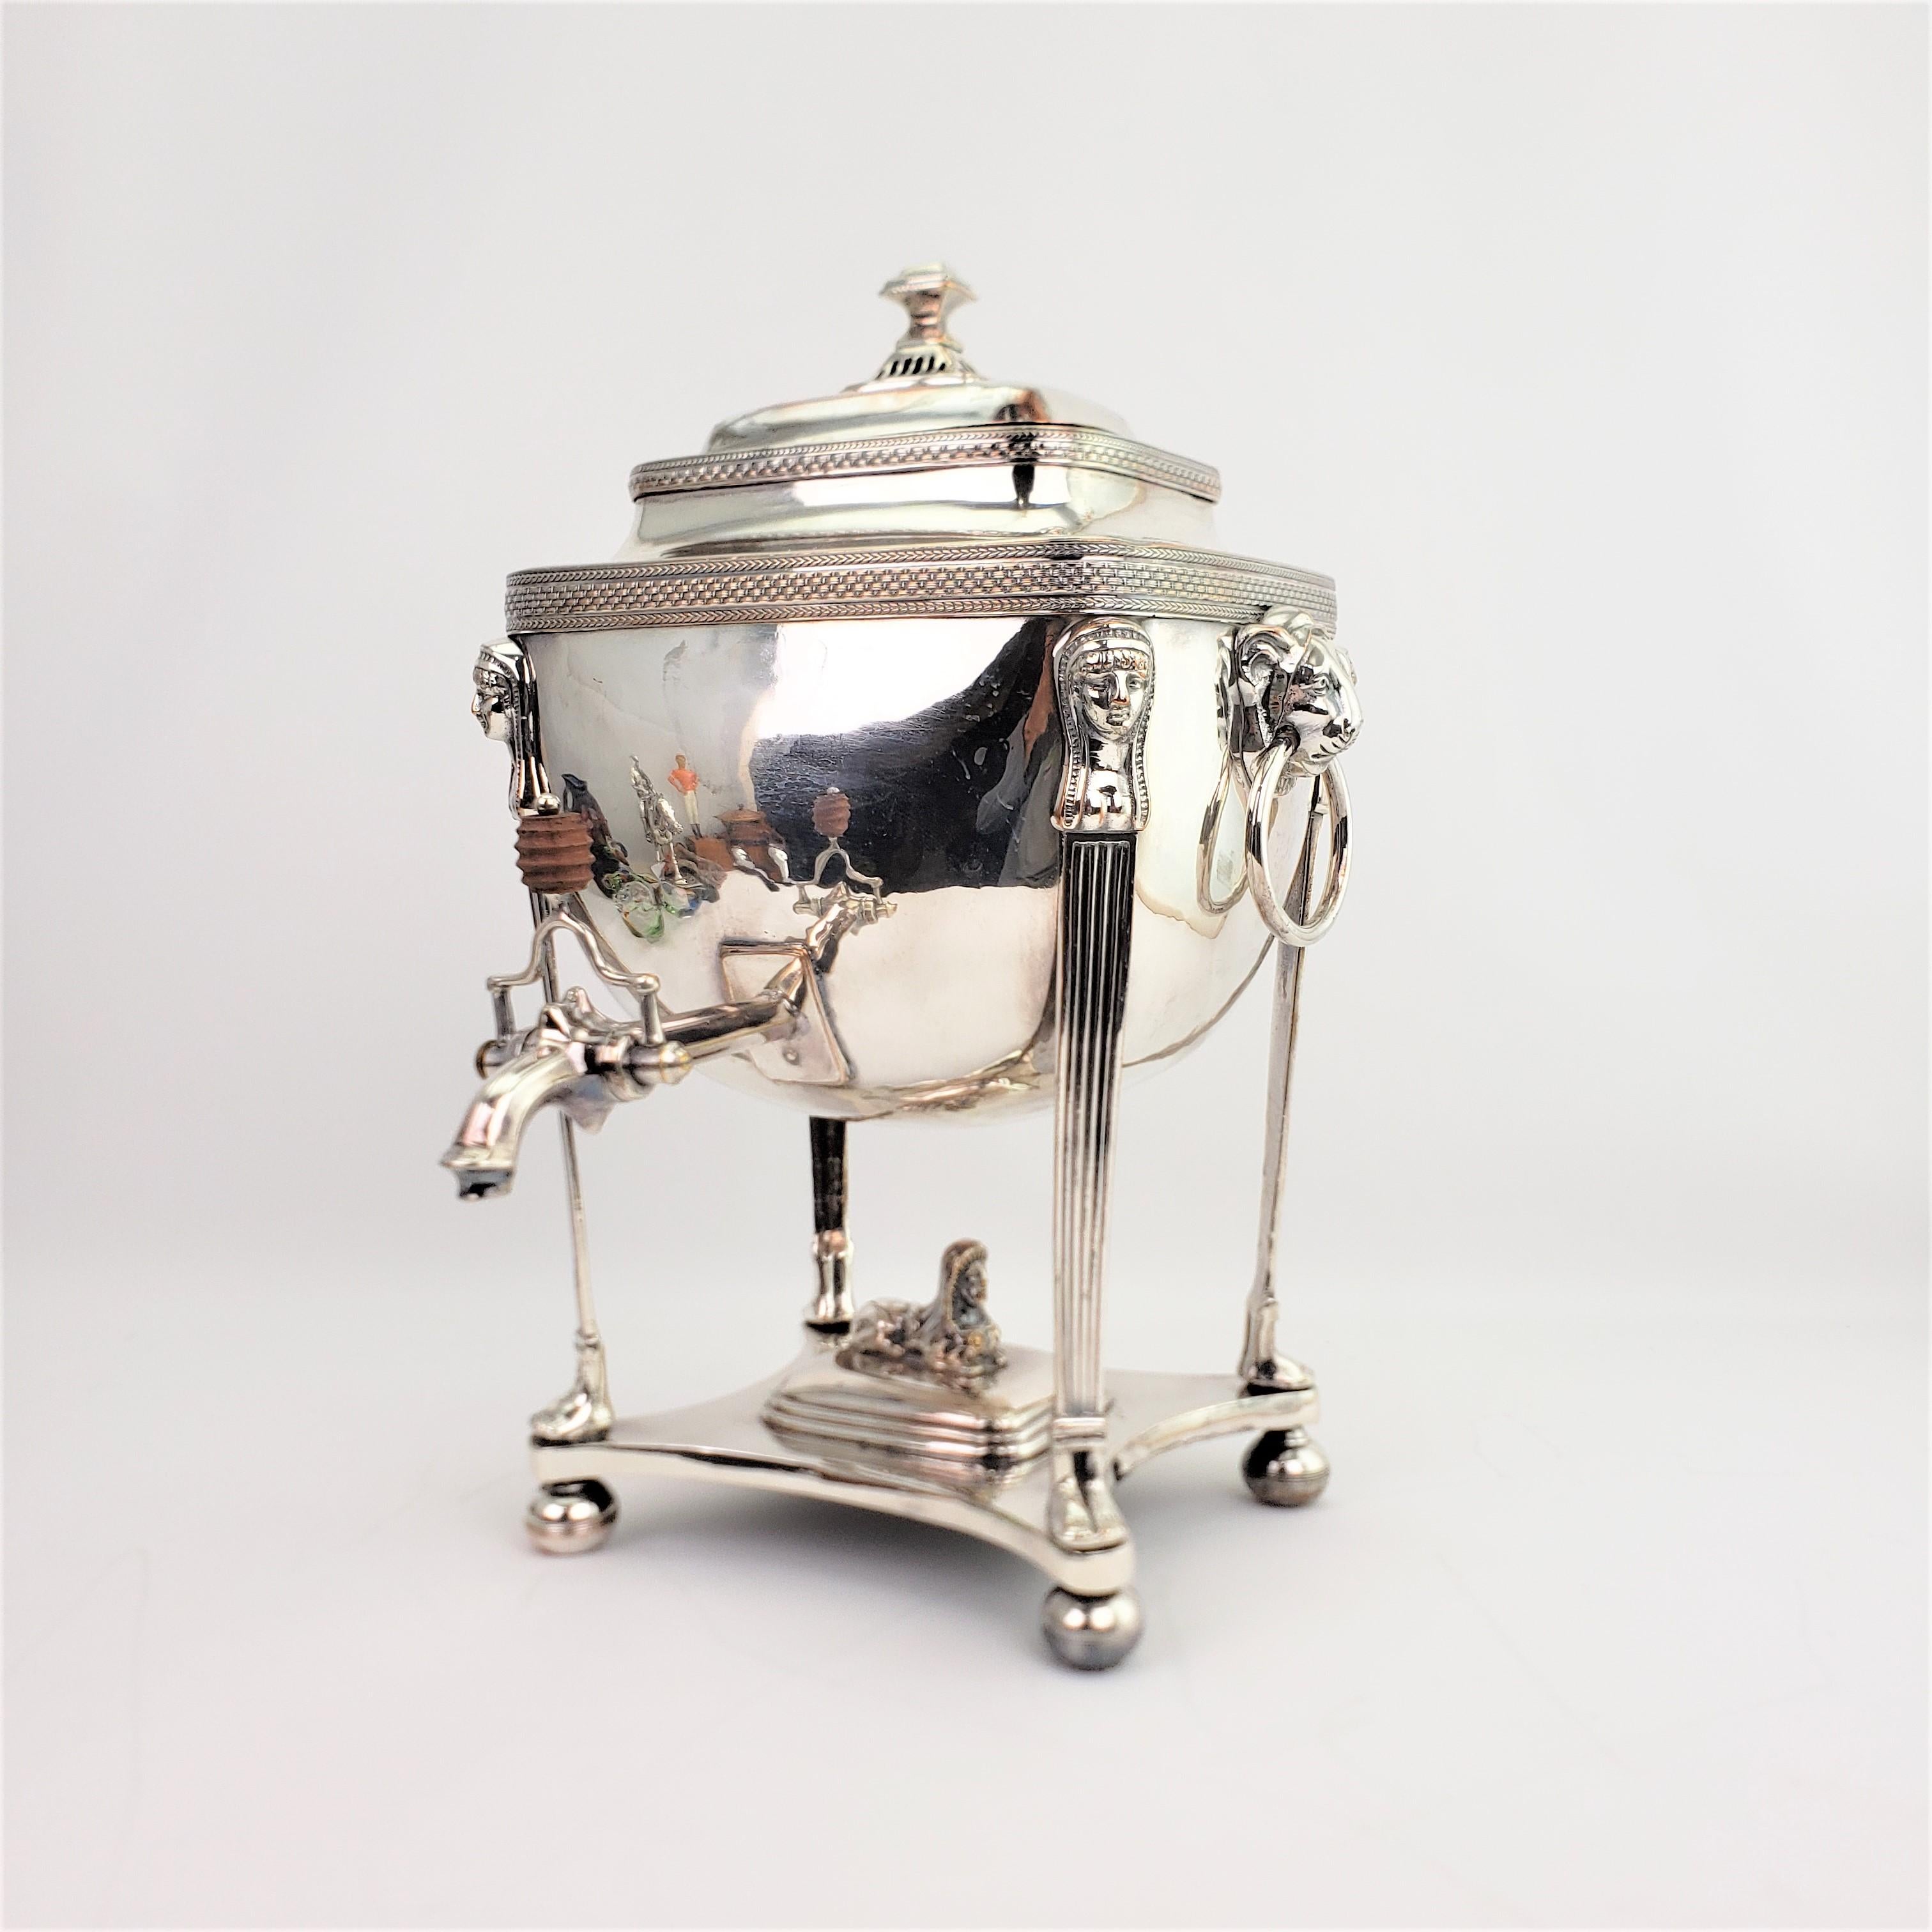 This antique silver plated hot water server is unsigned, but believed to have been made in England in approximately 1820 in the Egyptian Revival style. The server is done in an early Sheffield plate and features lion mounts on either side which